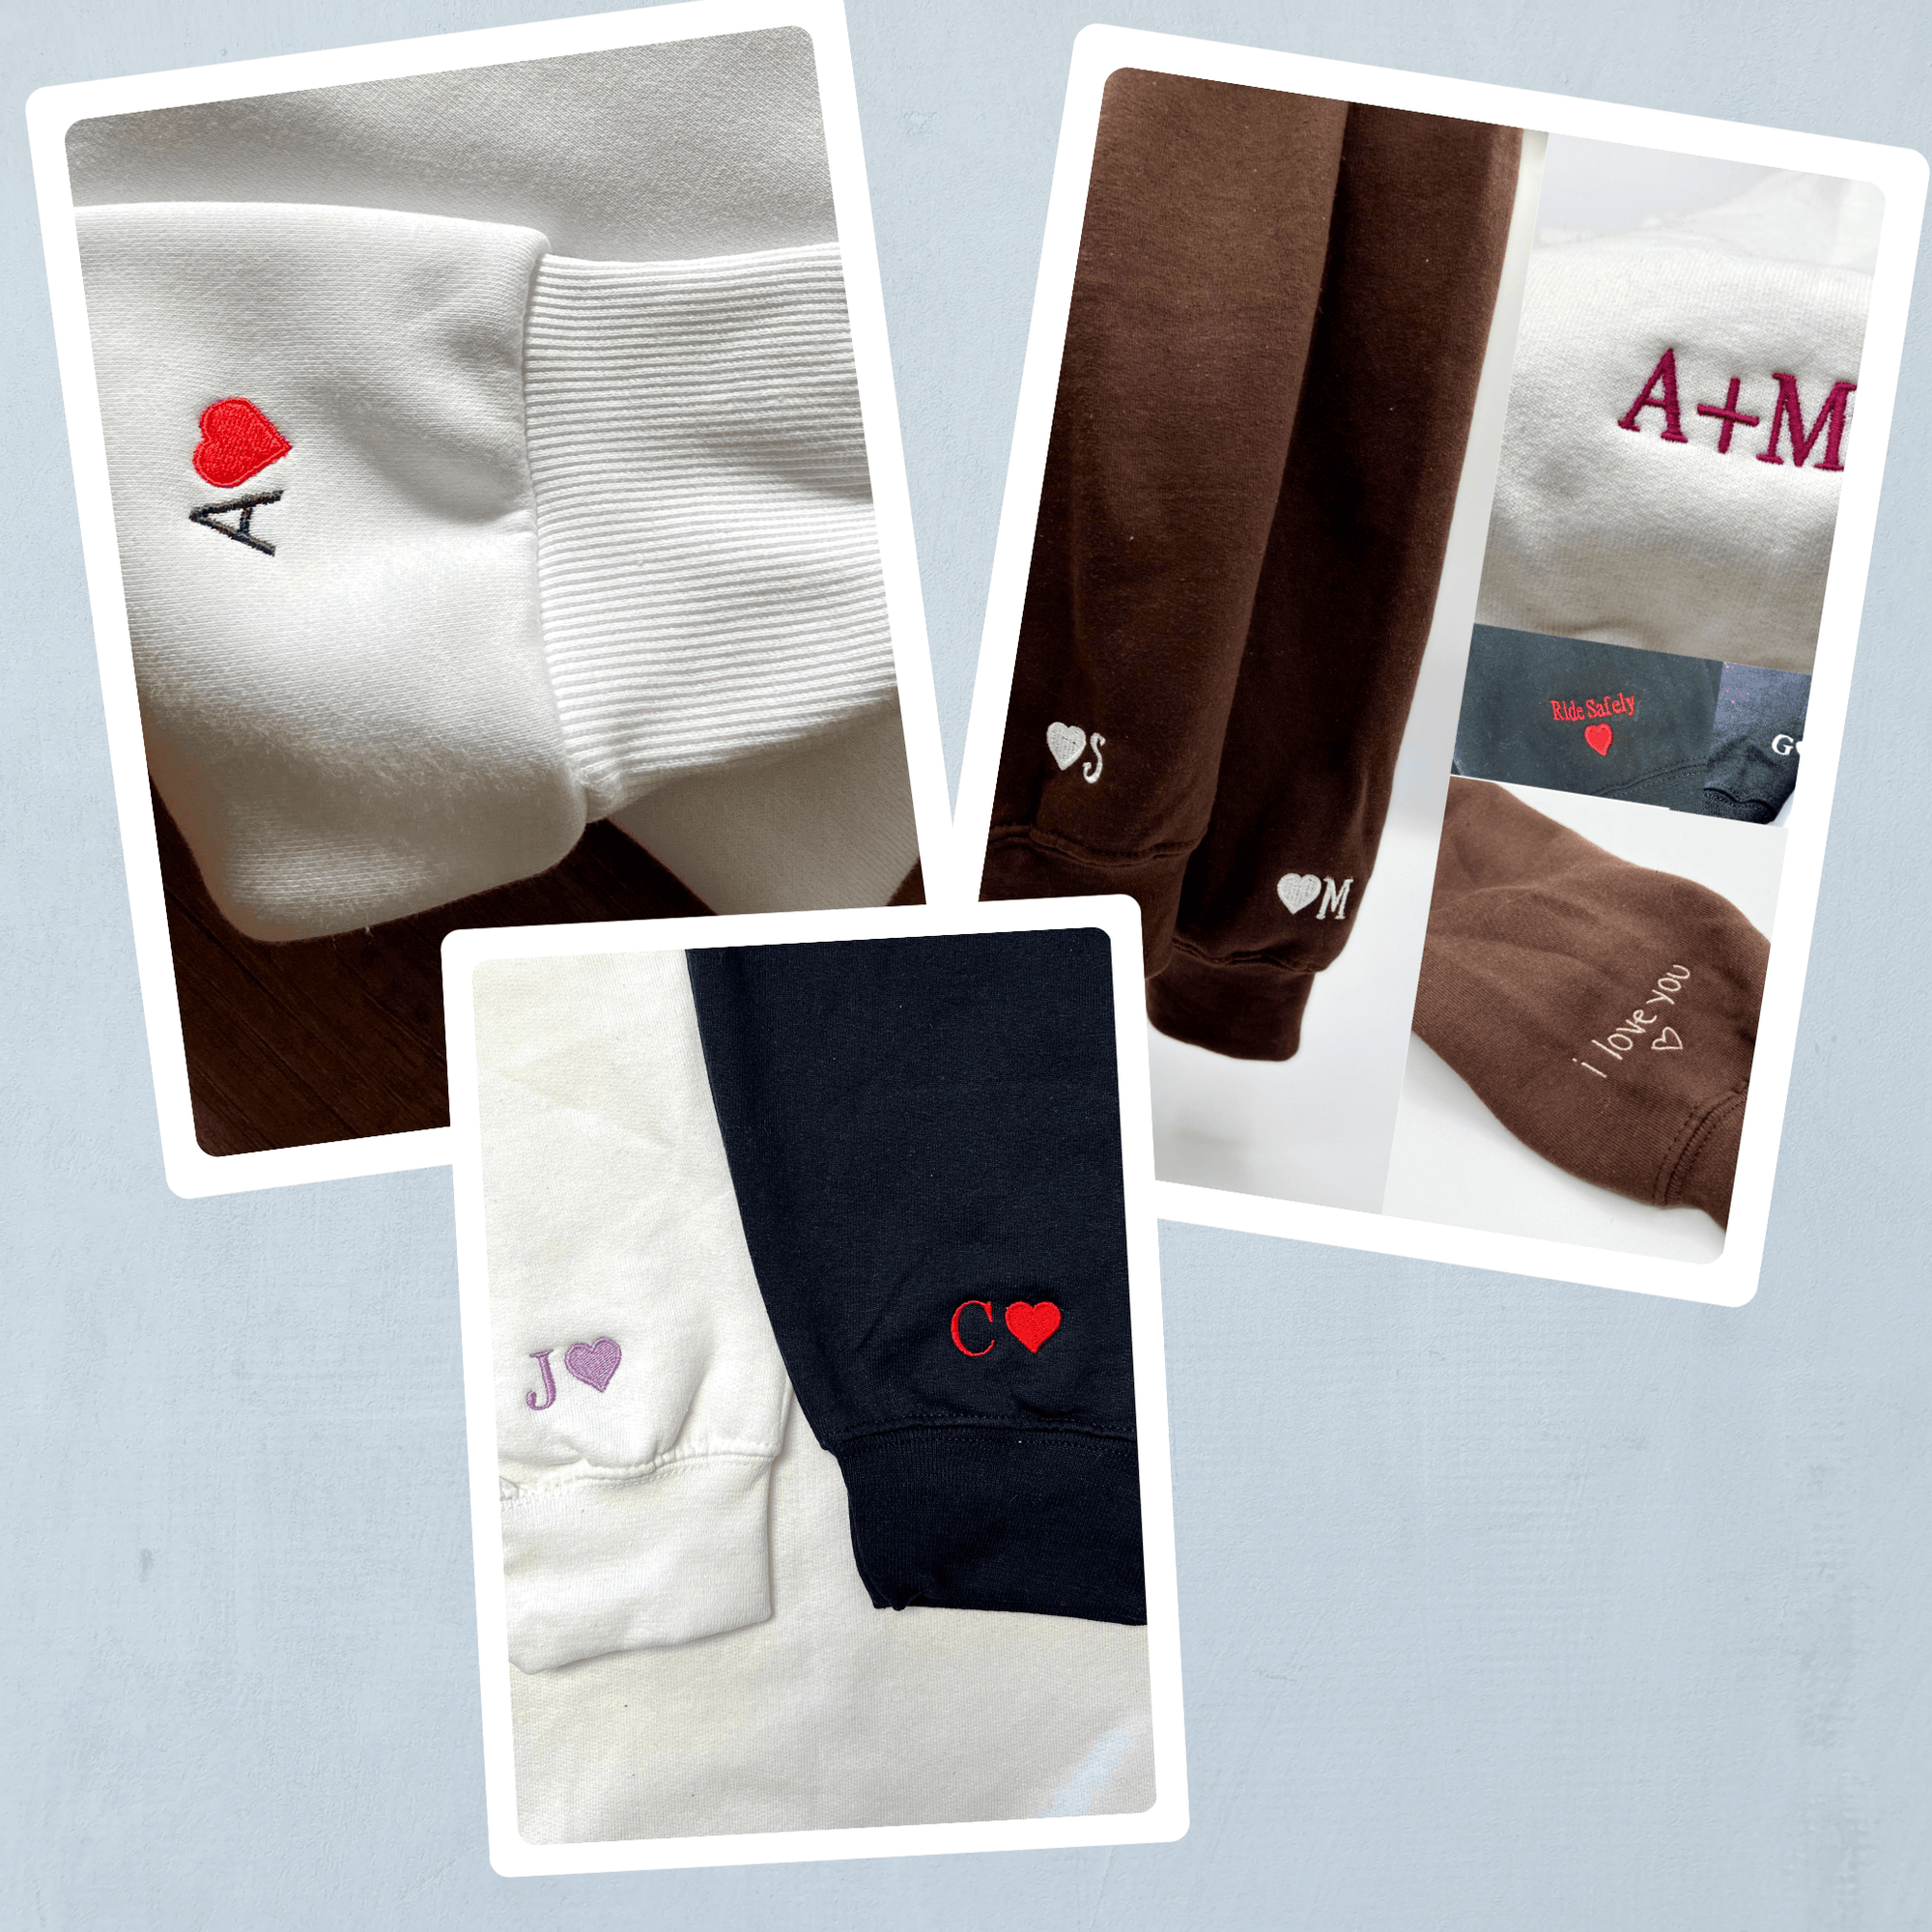 Custom Embroidered Hoodies For Couples, Couples With Matching Hoodies, His Her Hoodies, Cute Cartoon Couples Embroidered Hoodie